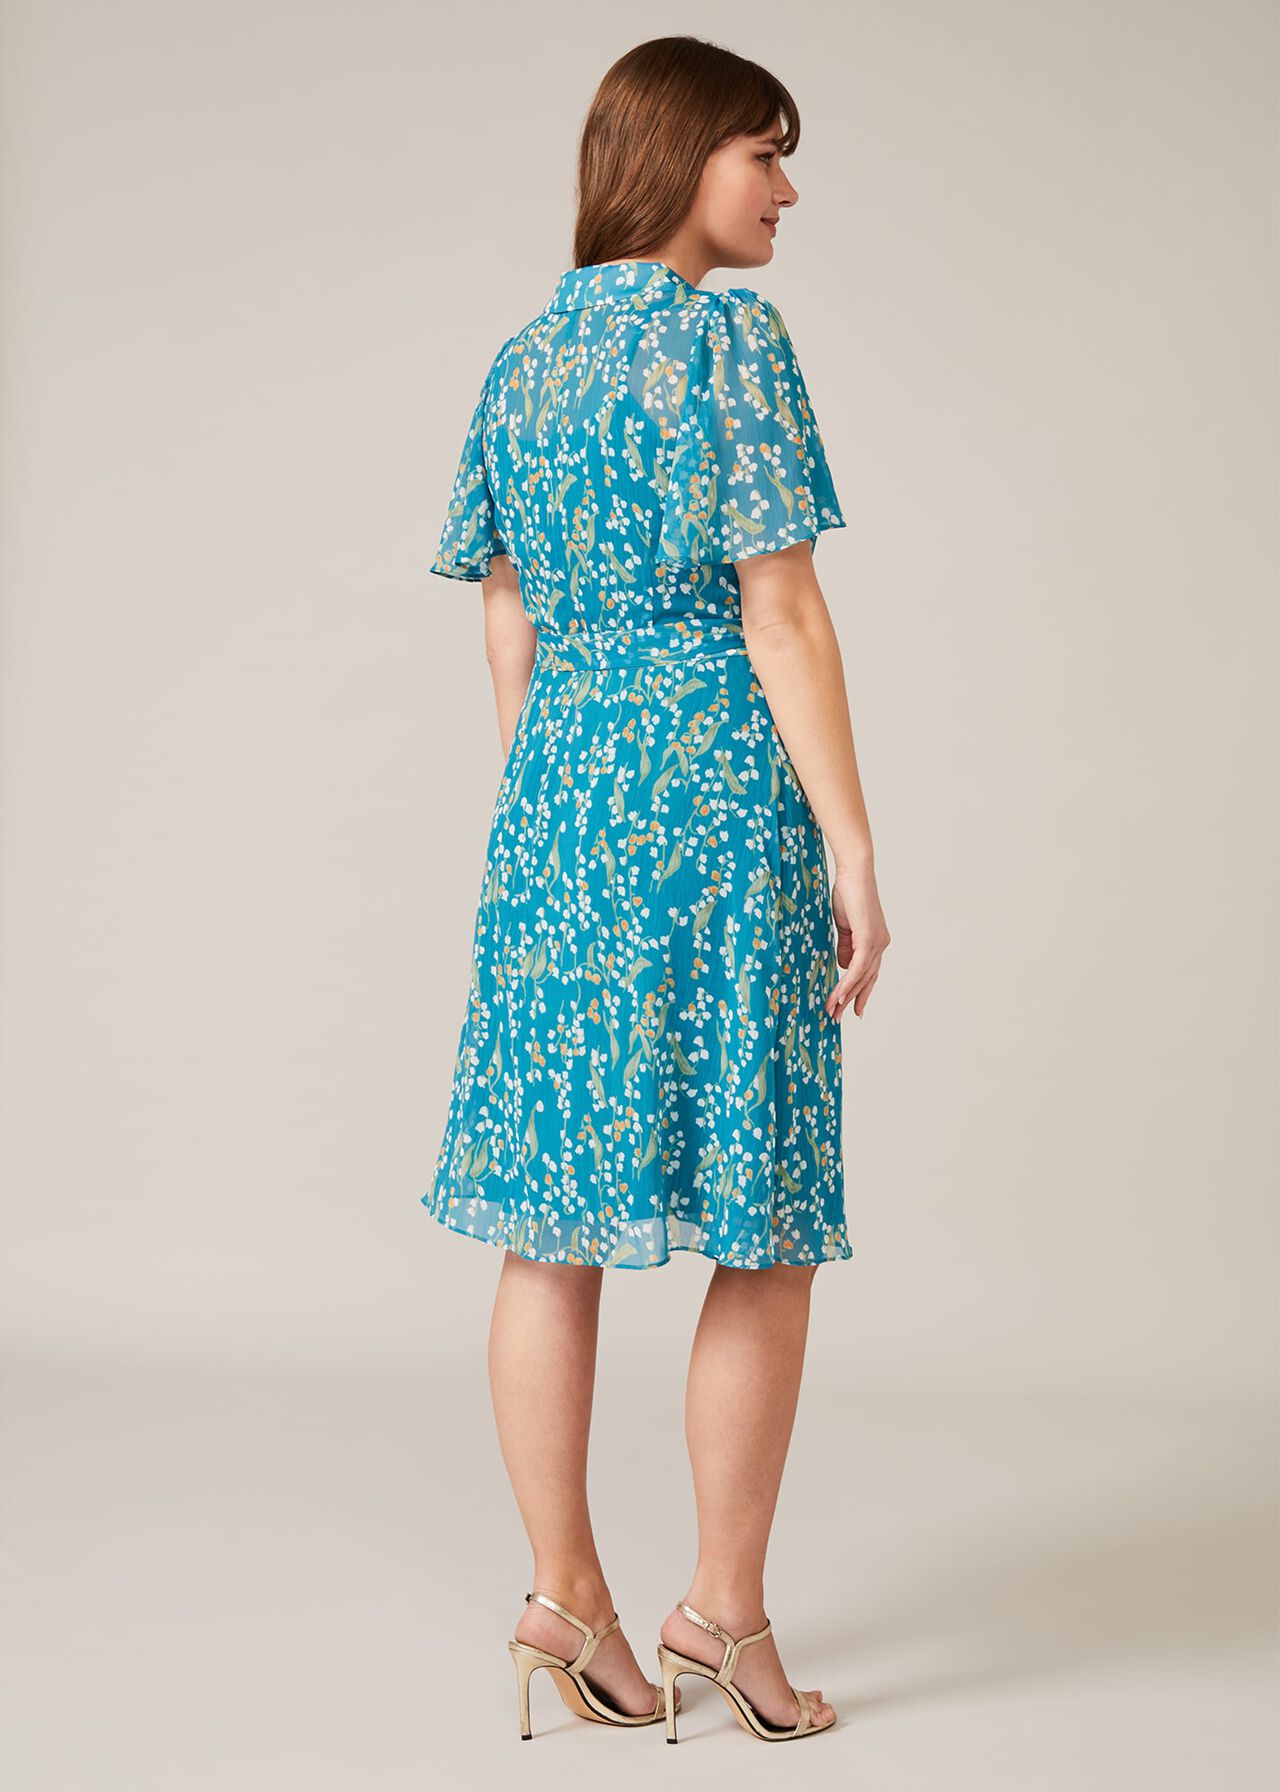 Lily Ditsy Printed Dress Phase Eight 